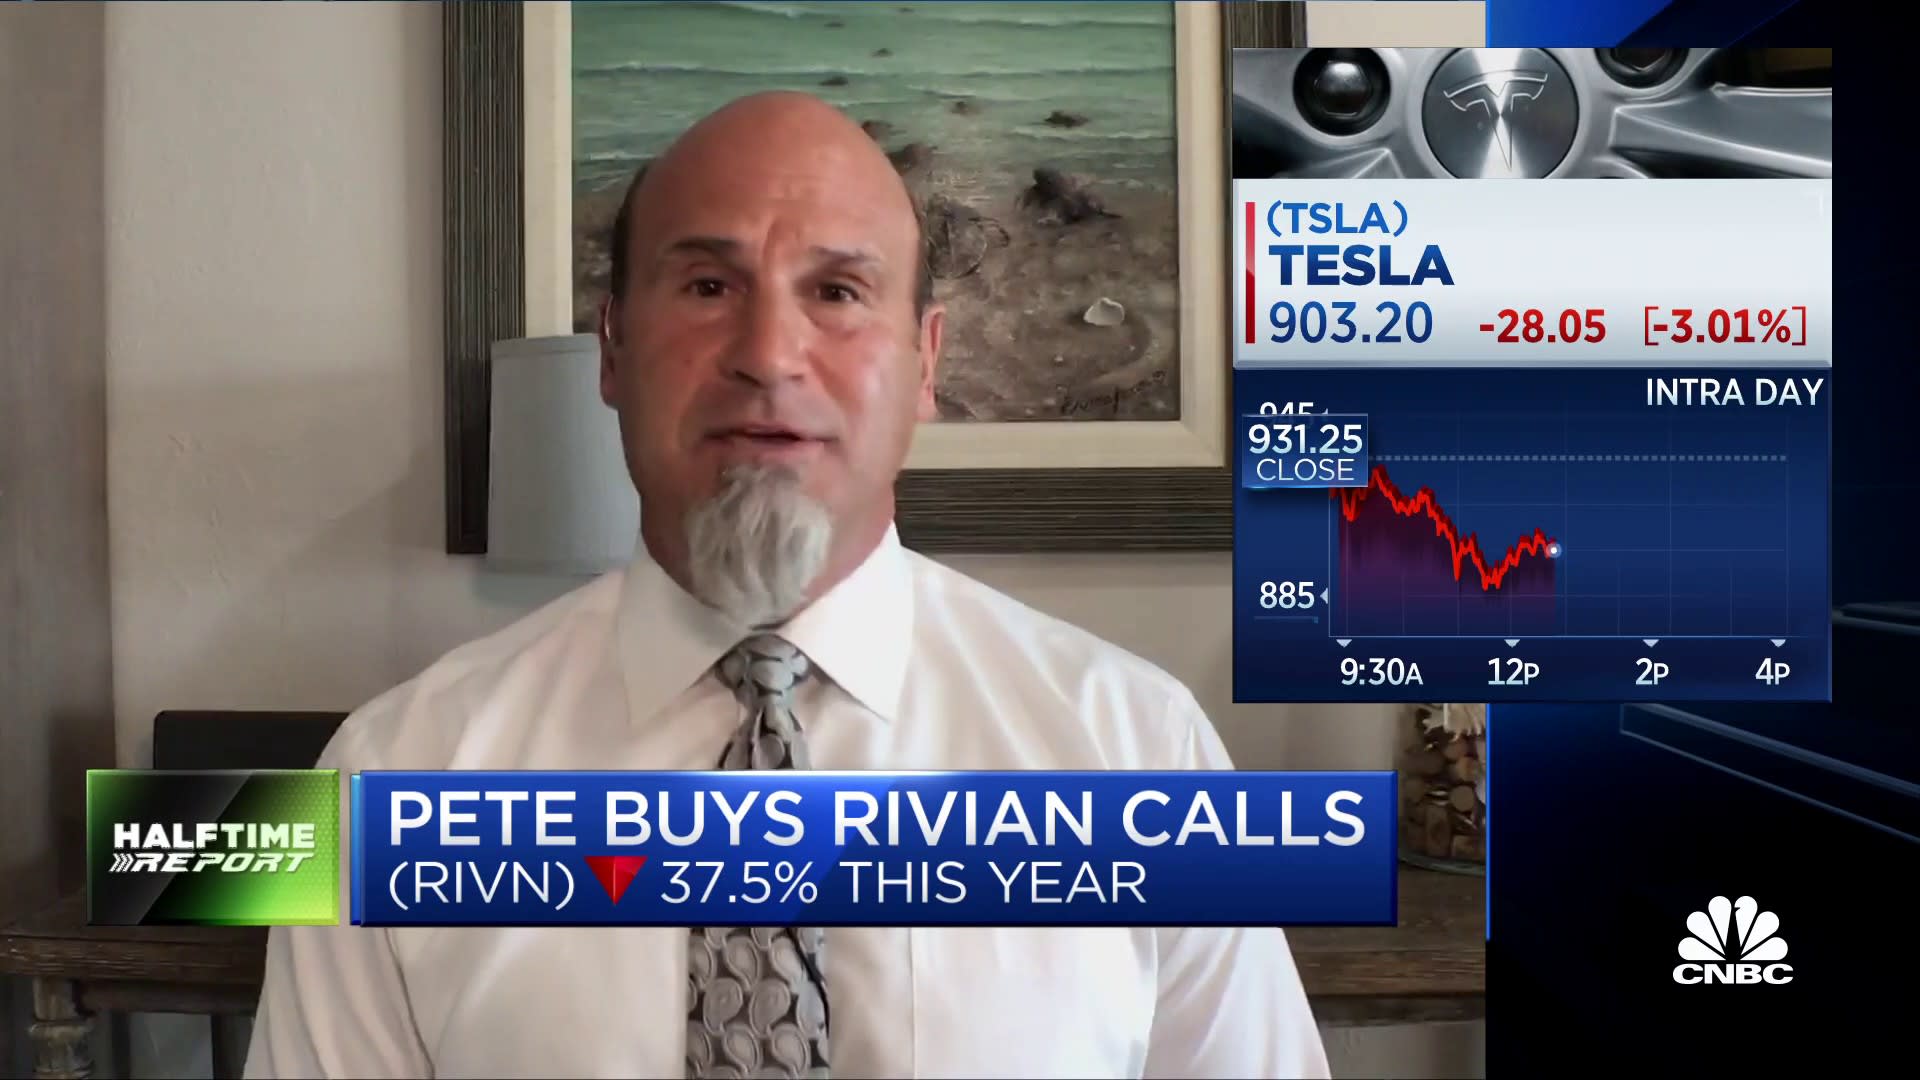 Technology is where they are king: Pete Najarian regarding Tesla